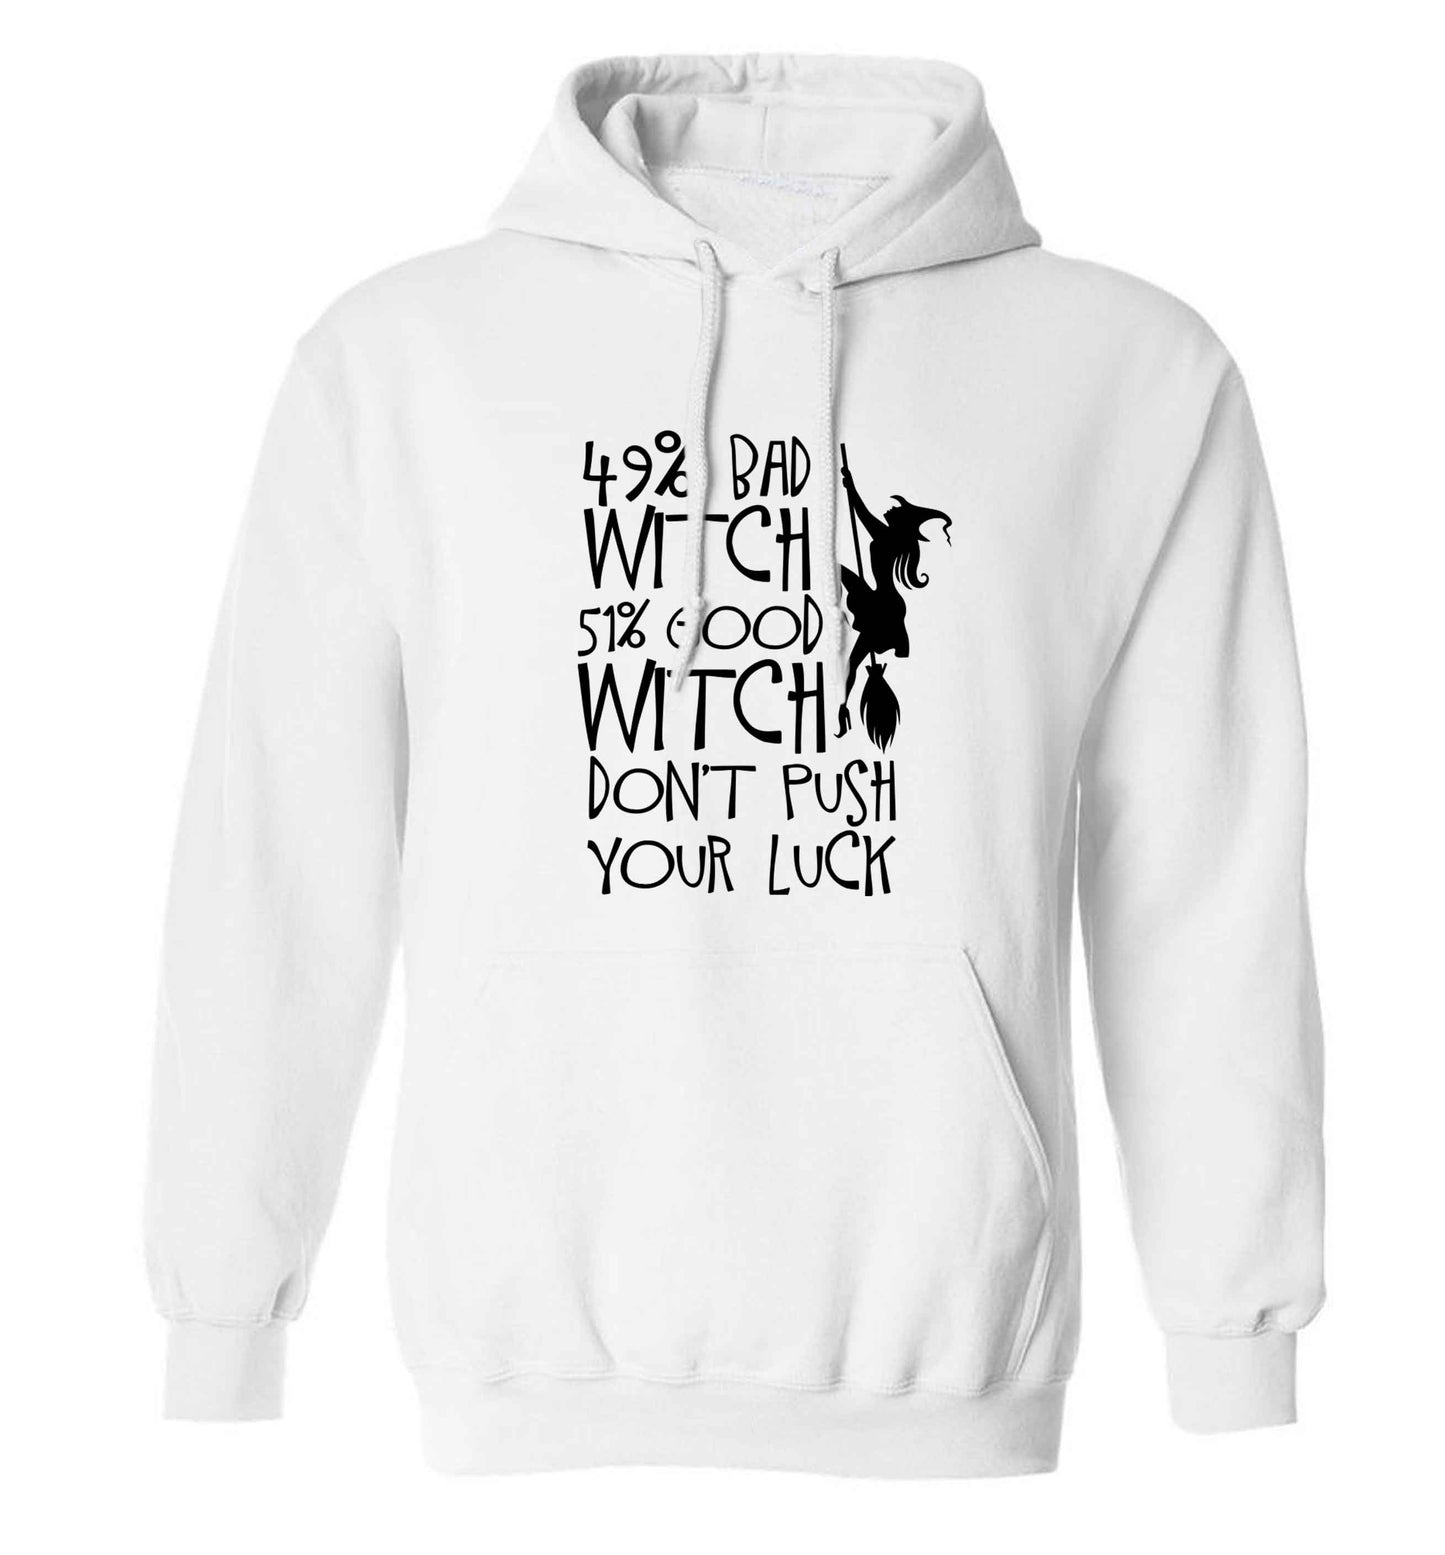 49% bad witch 51% good witch don't push your luck adults unisex white hoodie 2XL